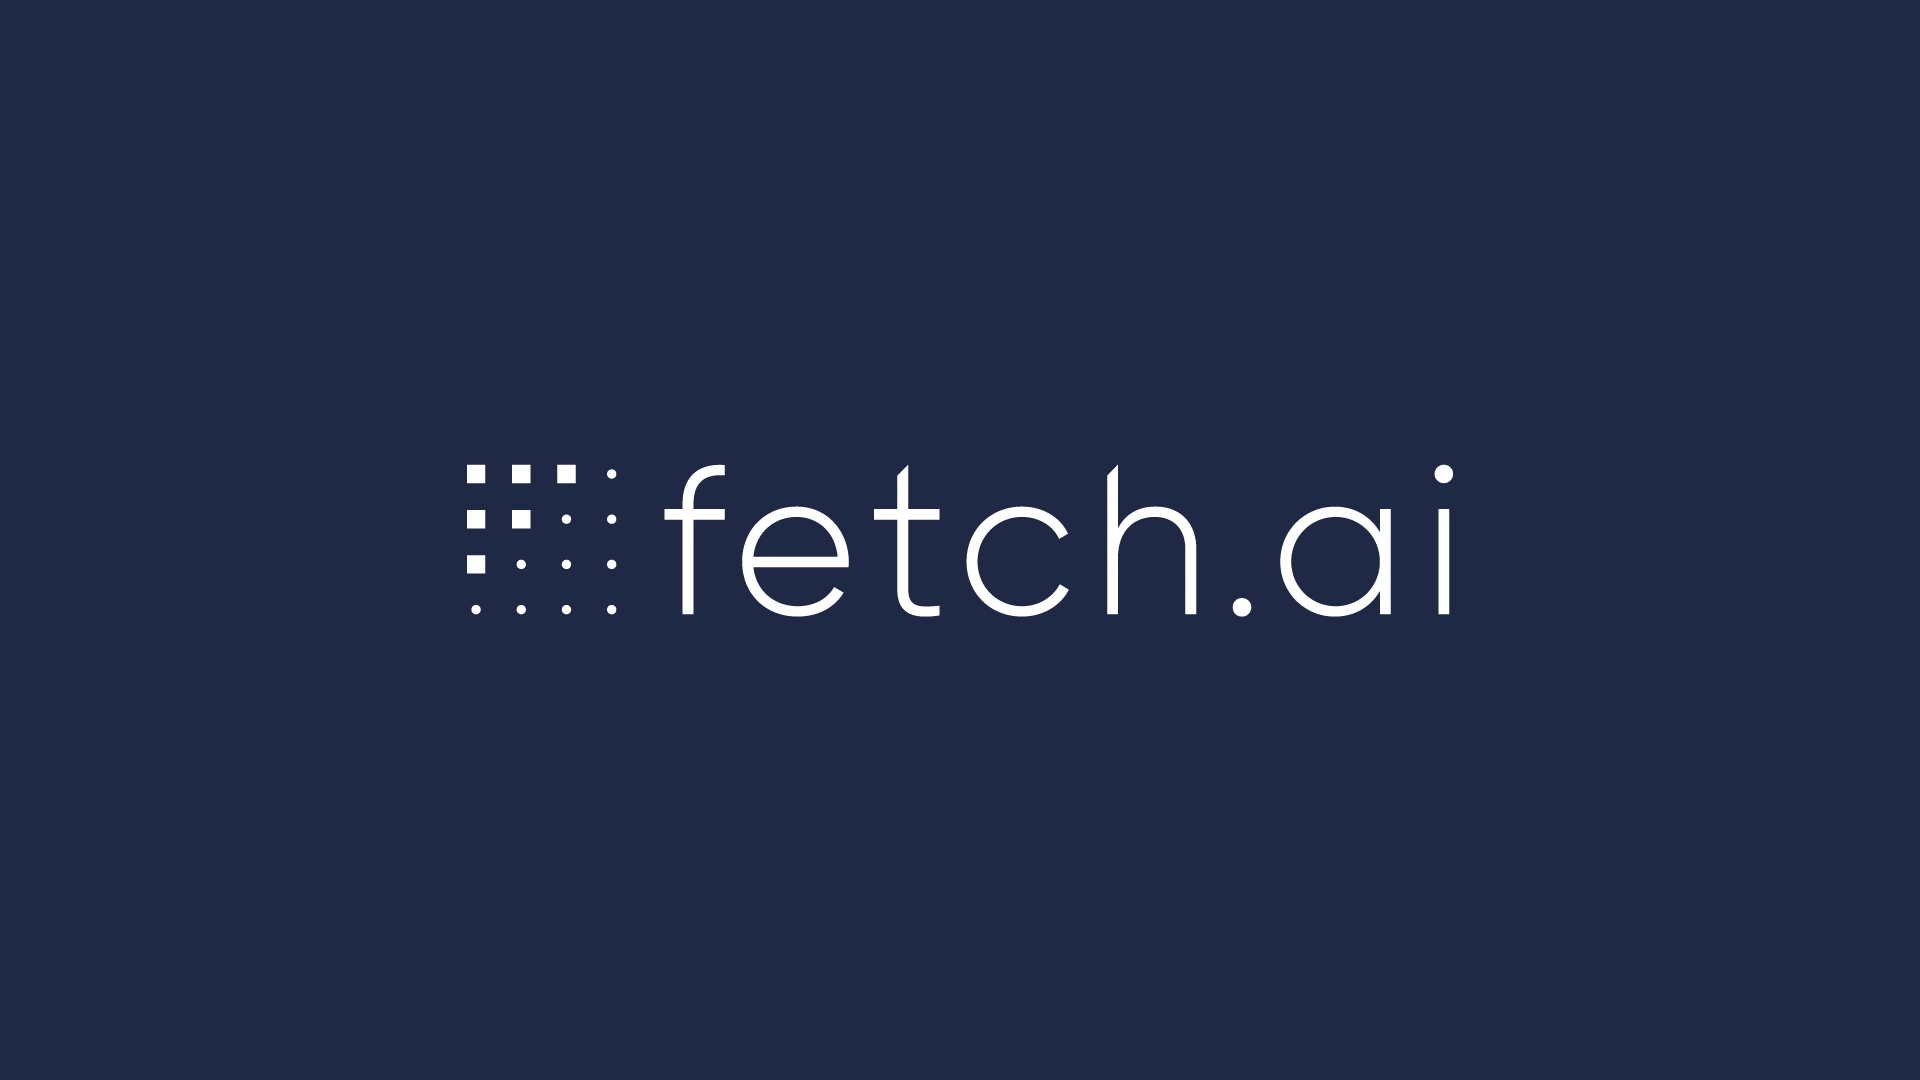 What is Fetch.ai?